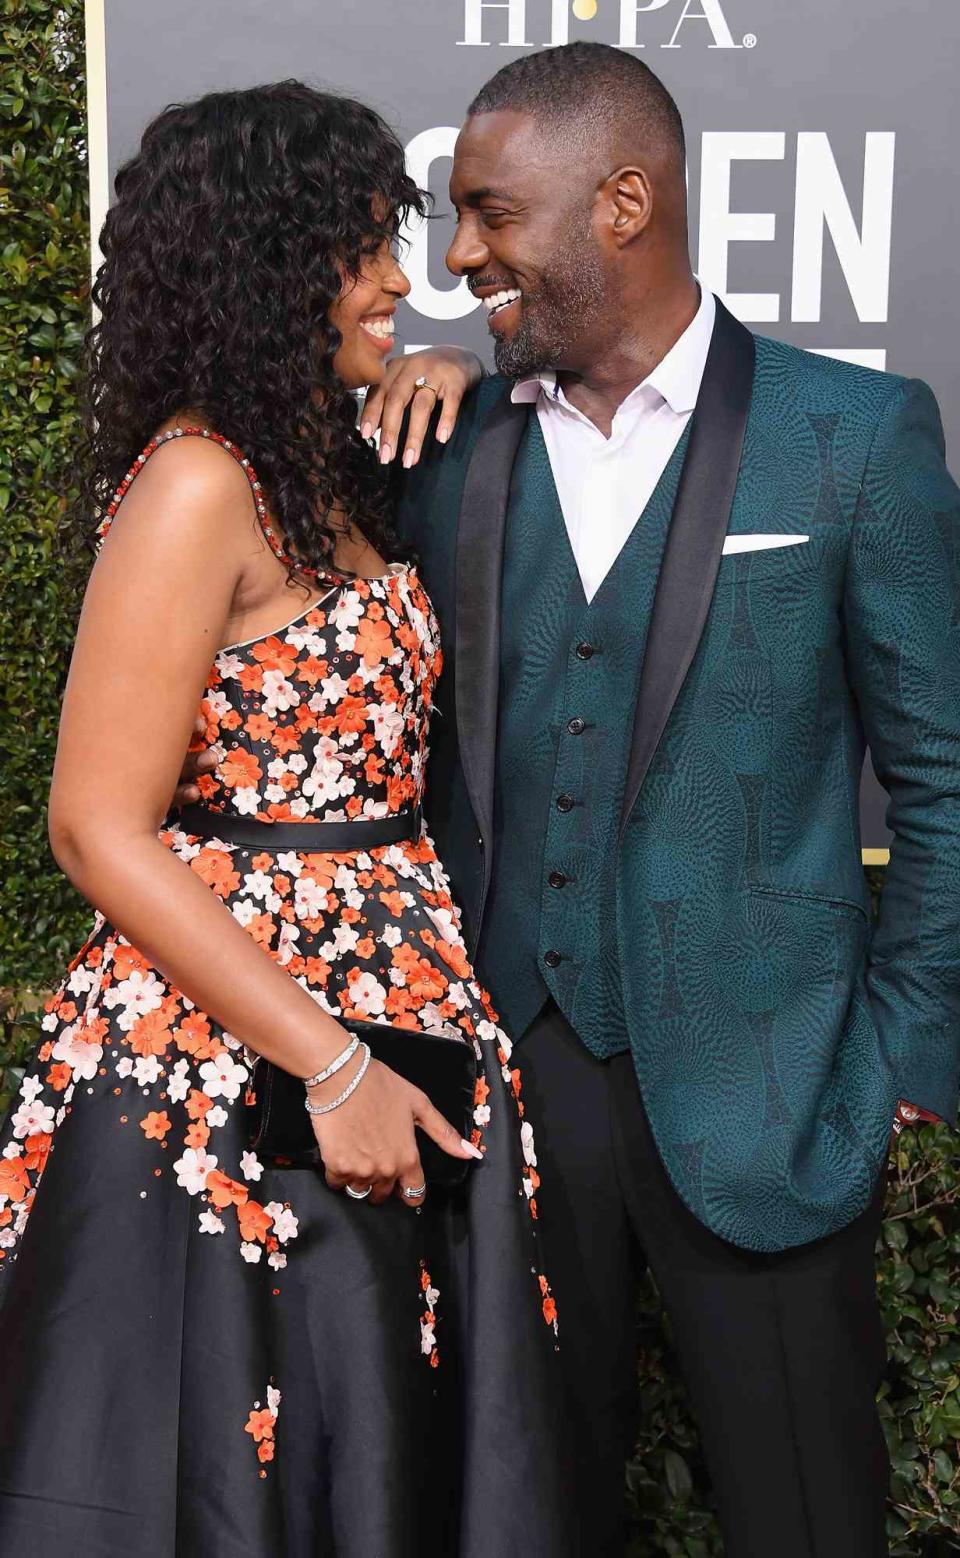 Idris Elba (R) and Sabrina Dhowre attend the 76th Annual Golden Globe Awards at The Beverly Hilton Hotel on January 6, 2019 in Beverly Hills, California